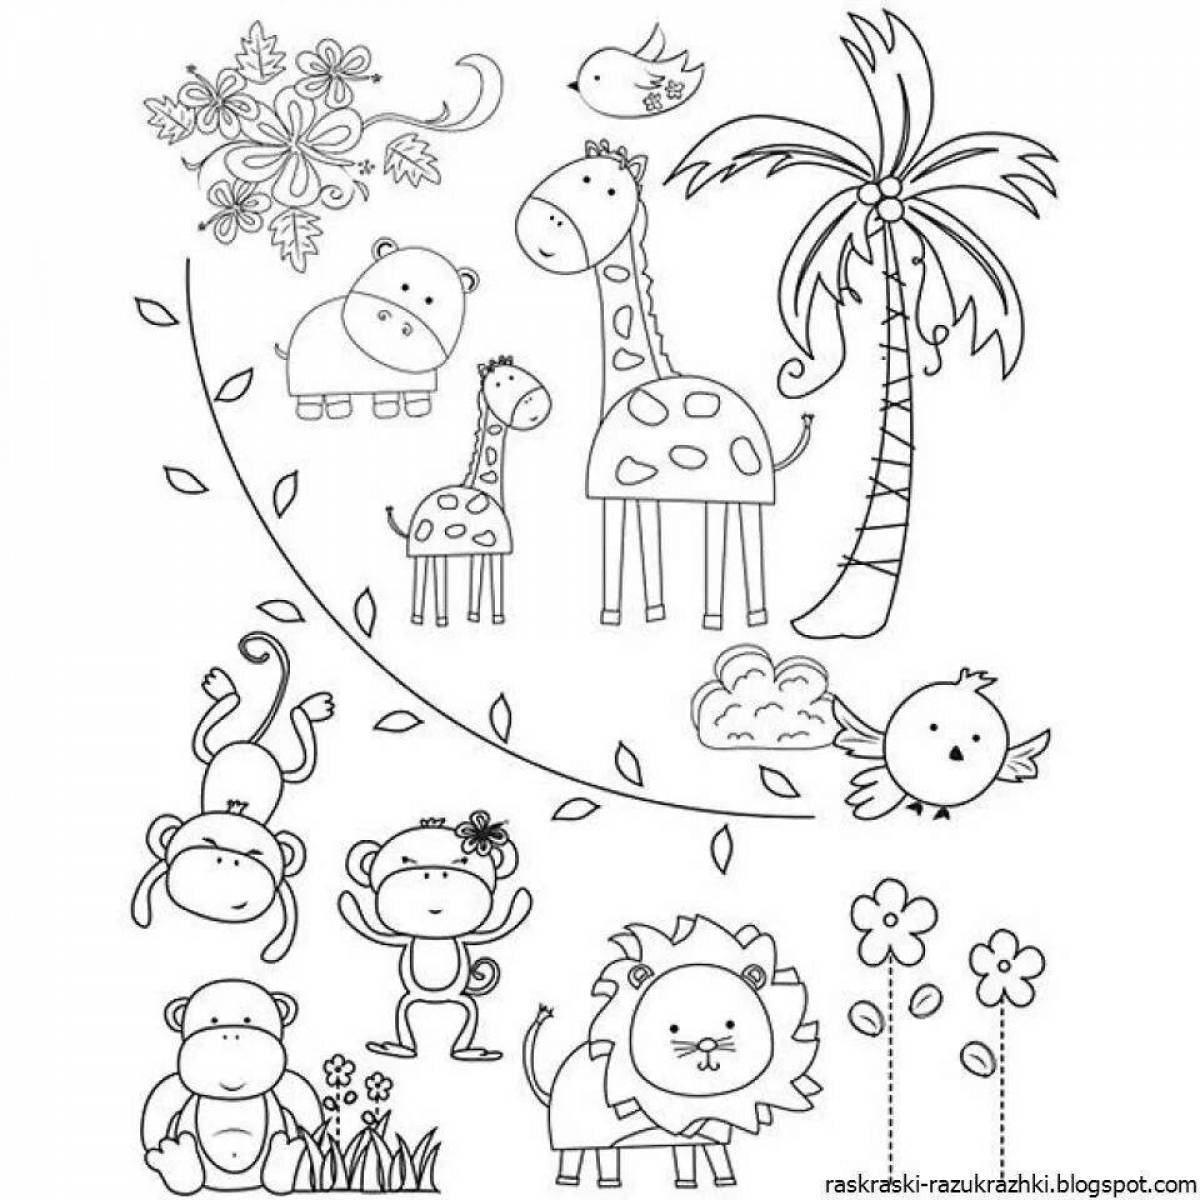 Cute zoo coloring pages for kids